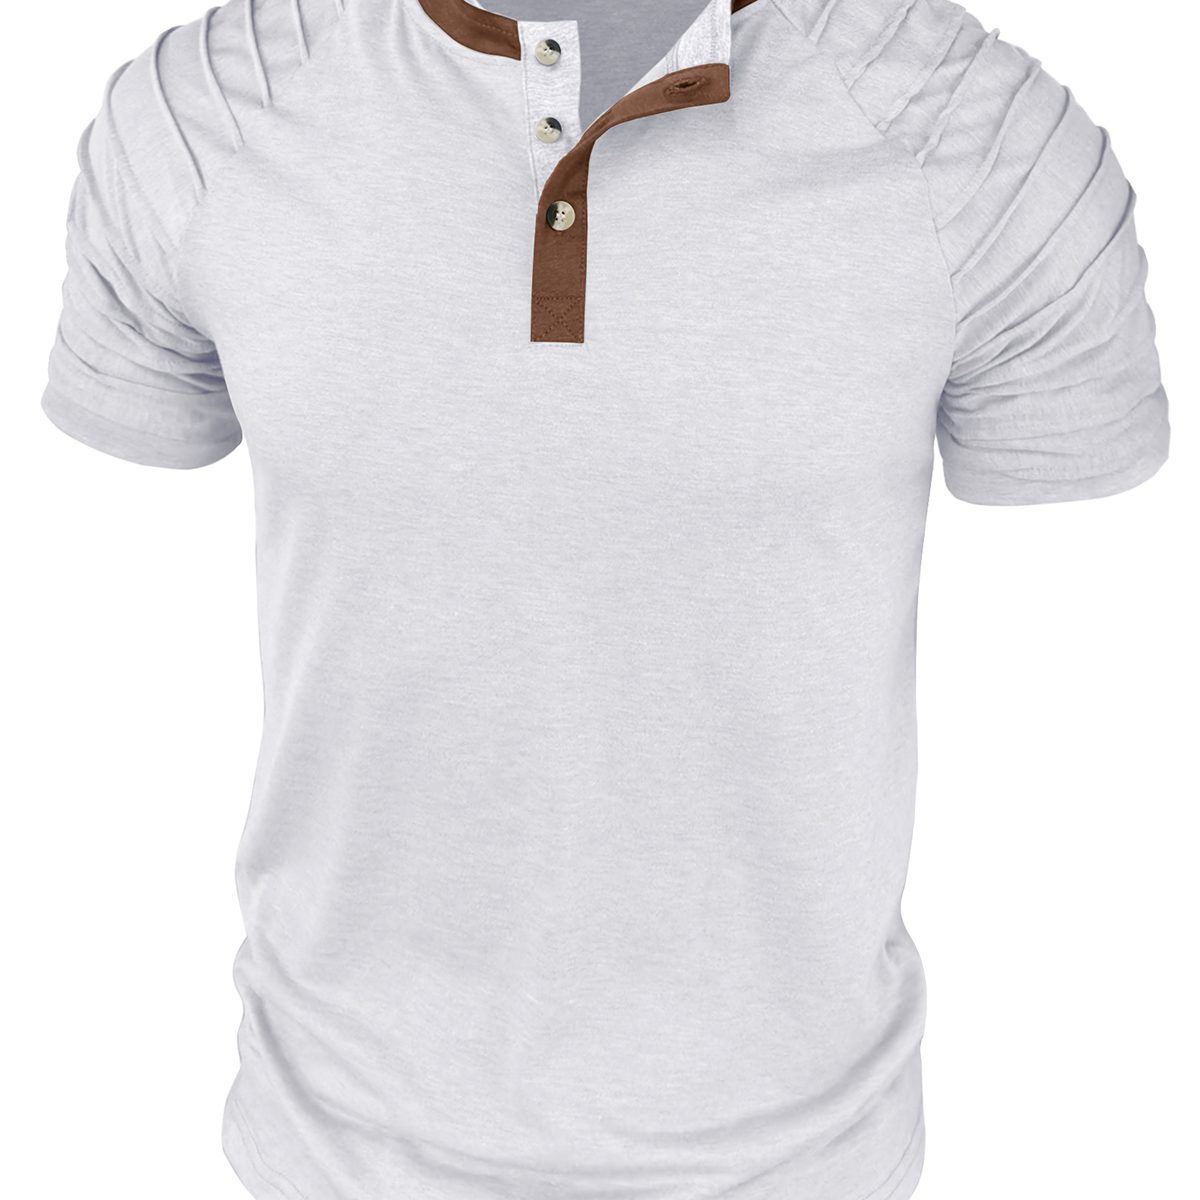 Men's Breathable Solid Color Casual  Color Block Short Sleeve T-shirt